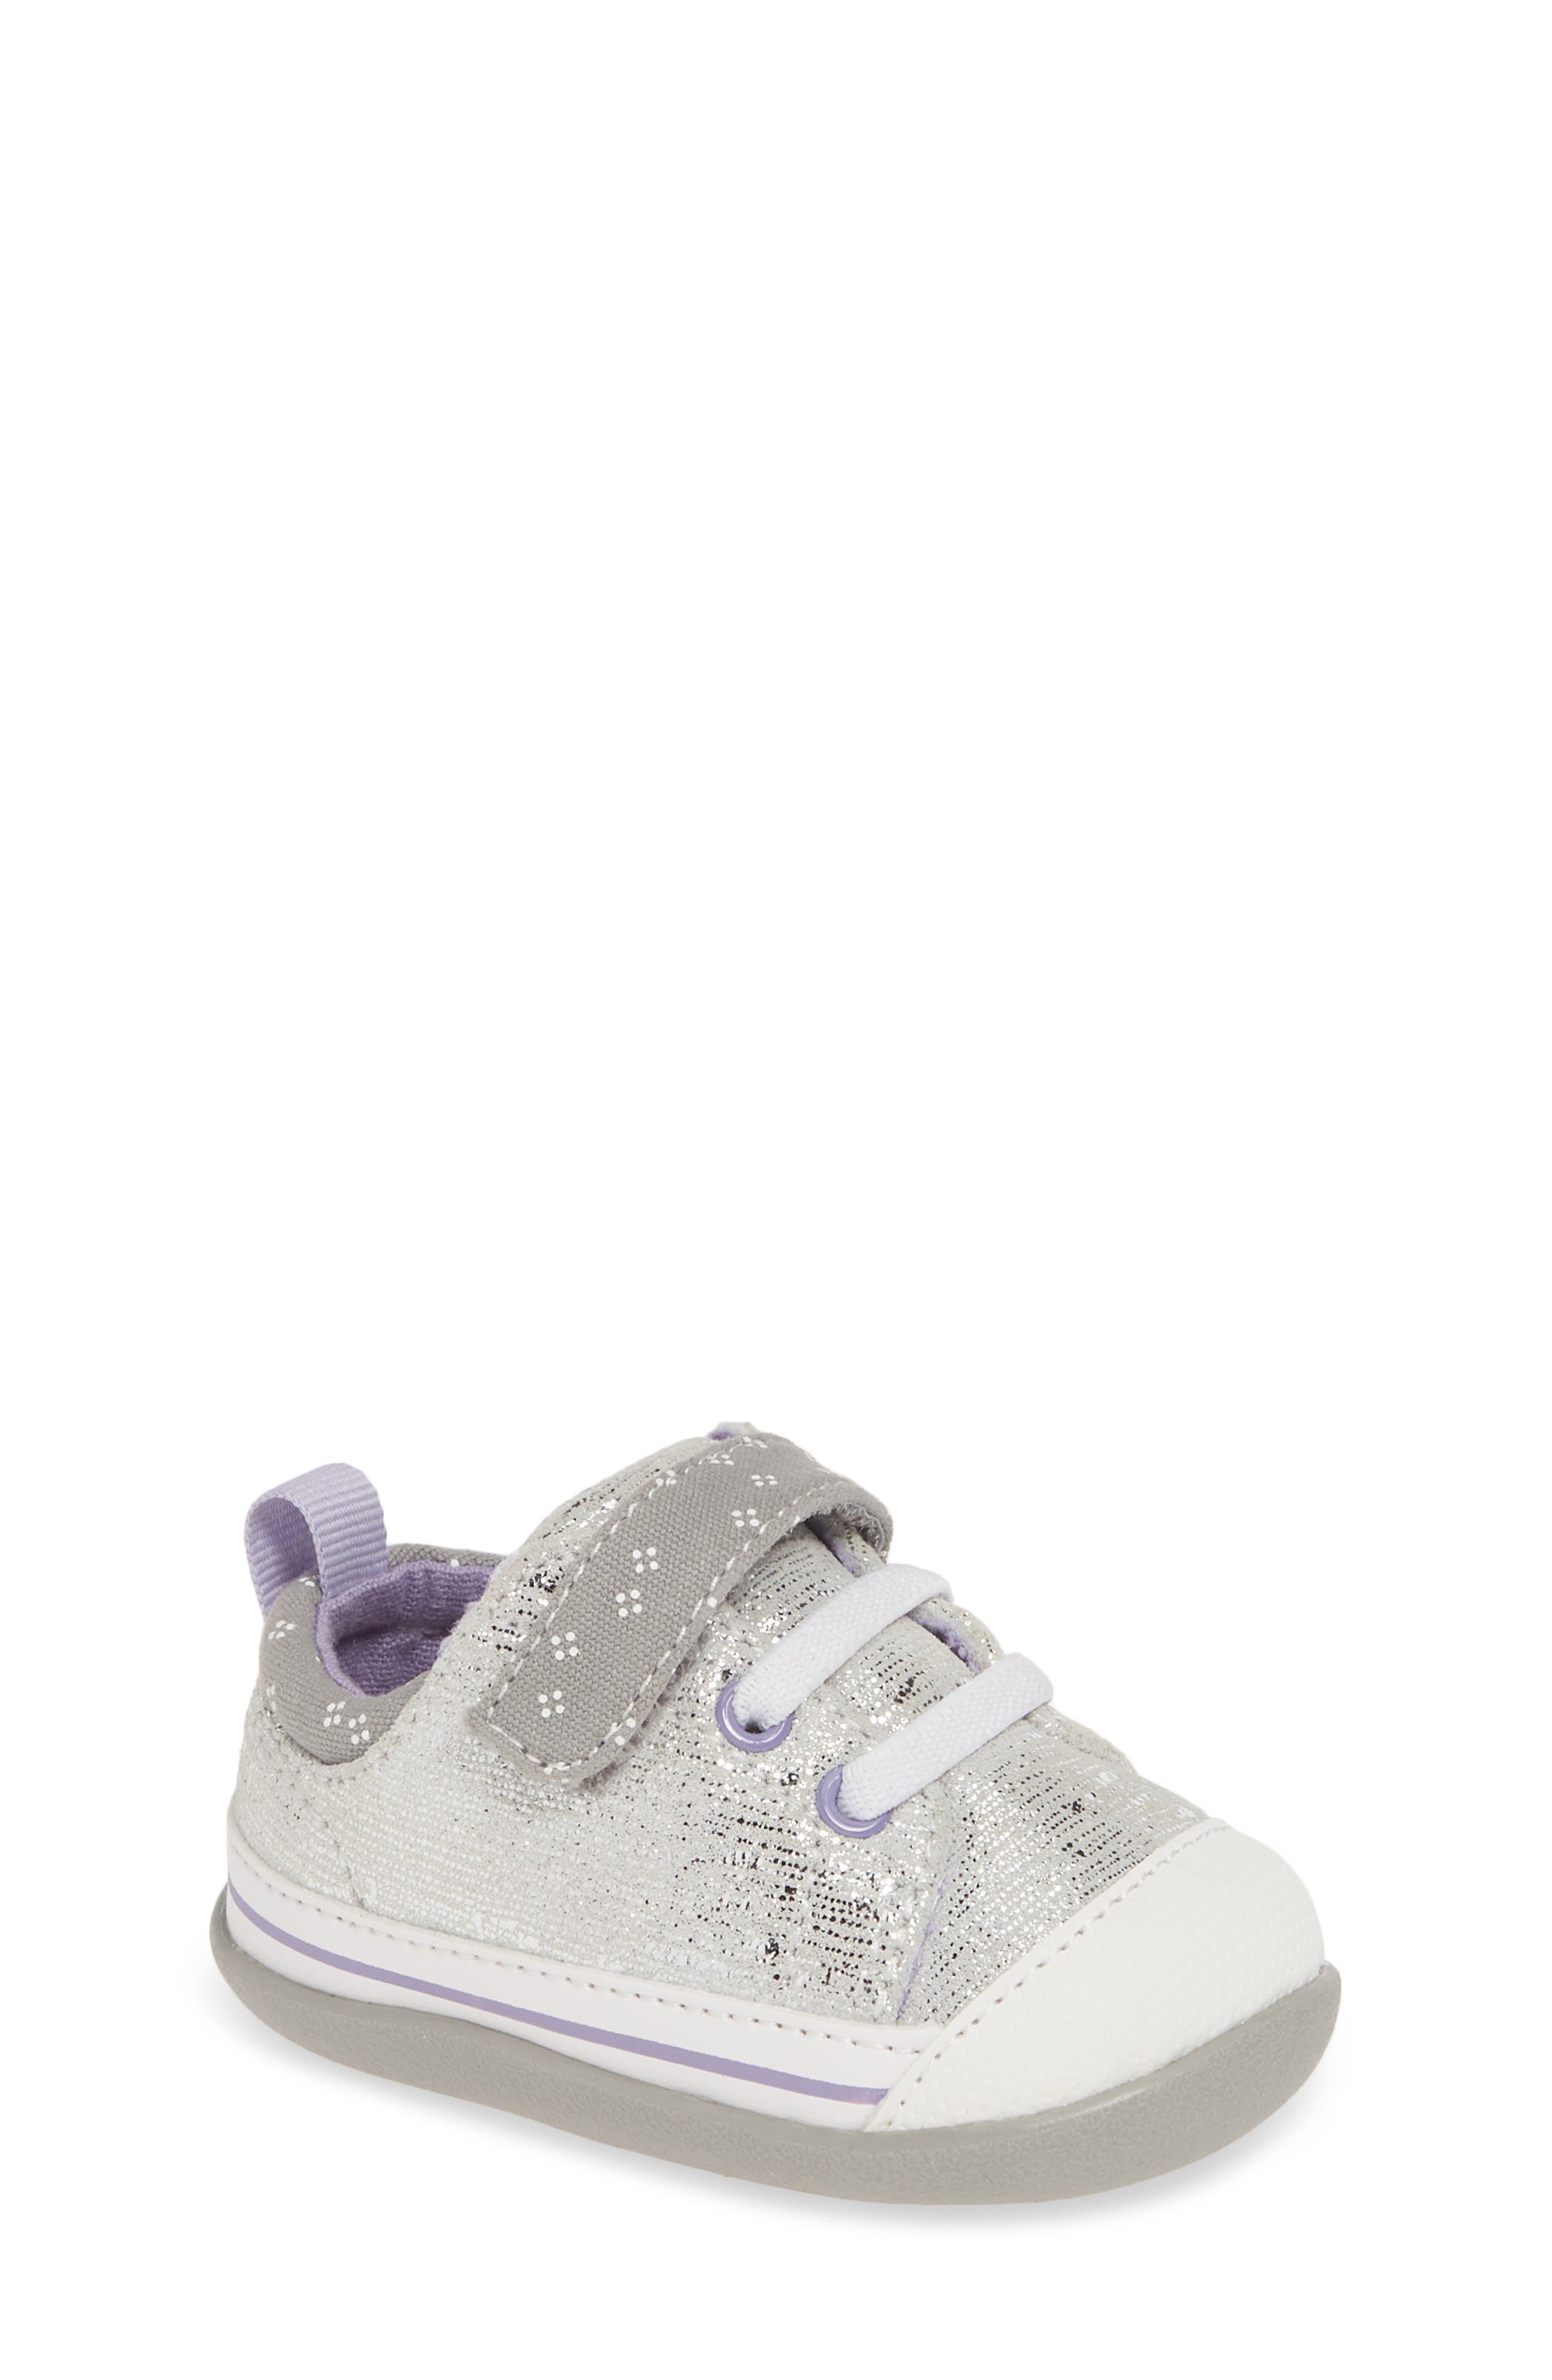 nordstrom baby shoes